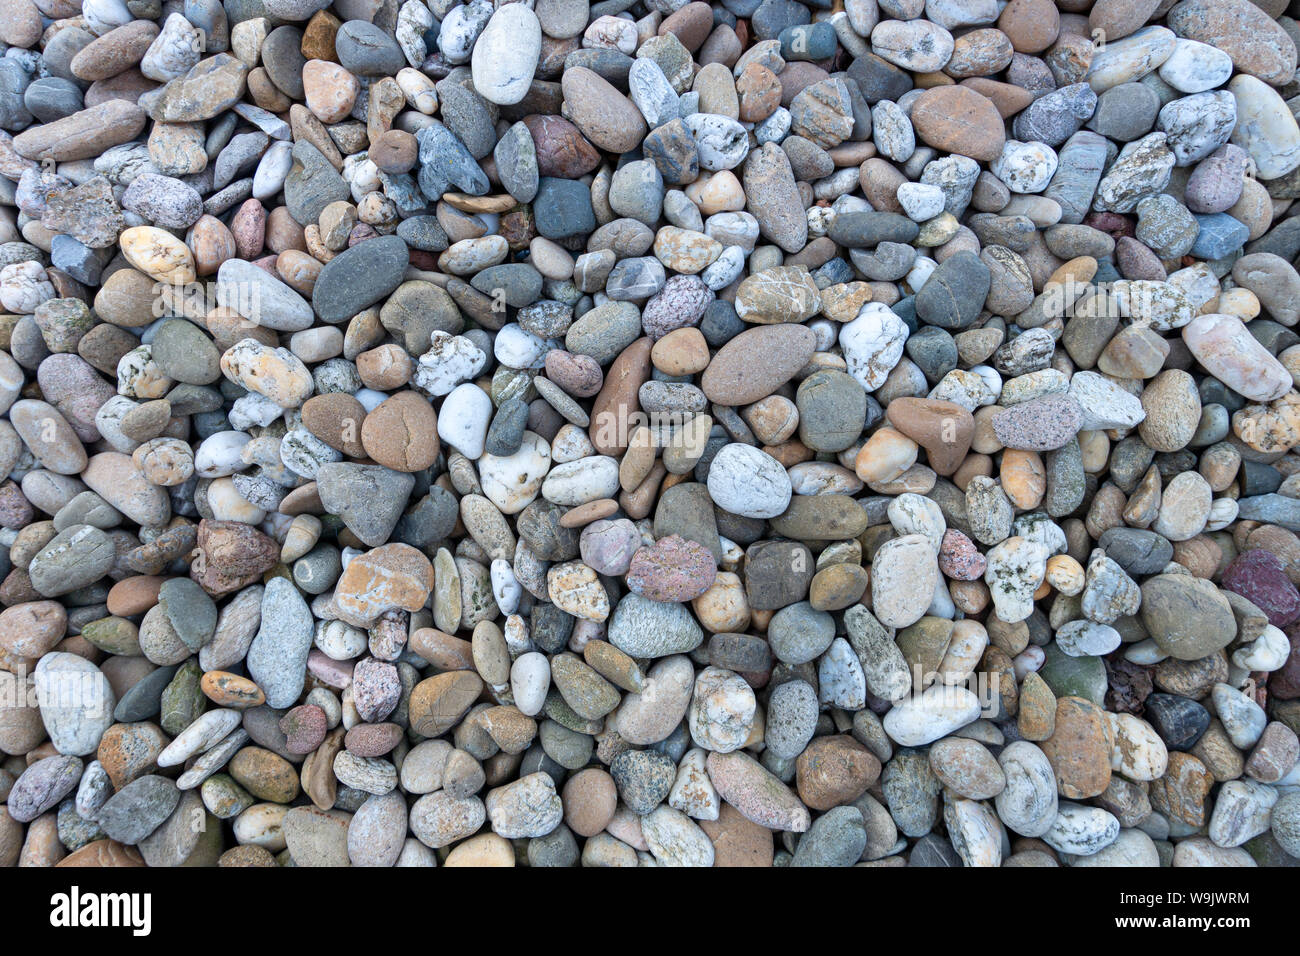 Area with small colored pebbles Stock Photo